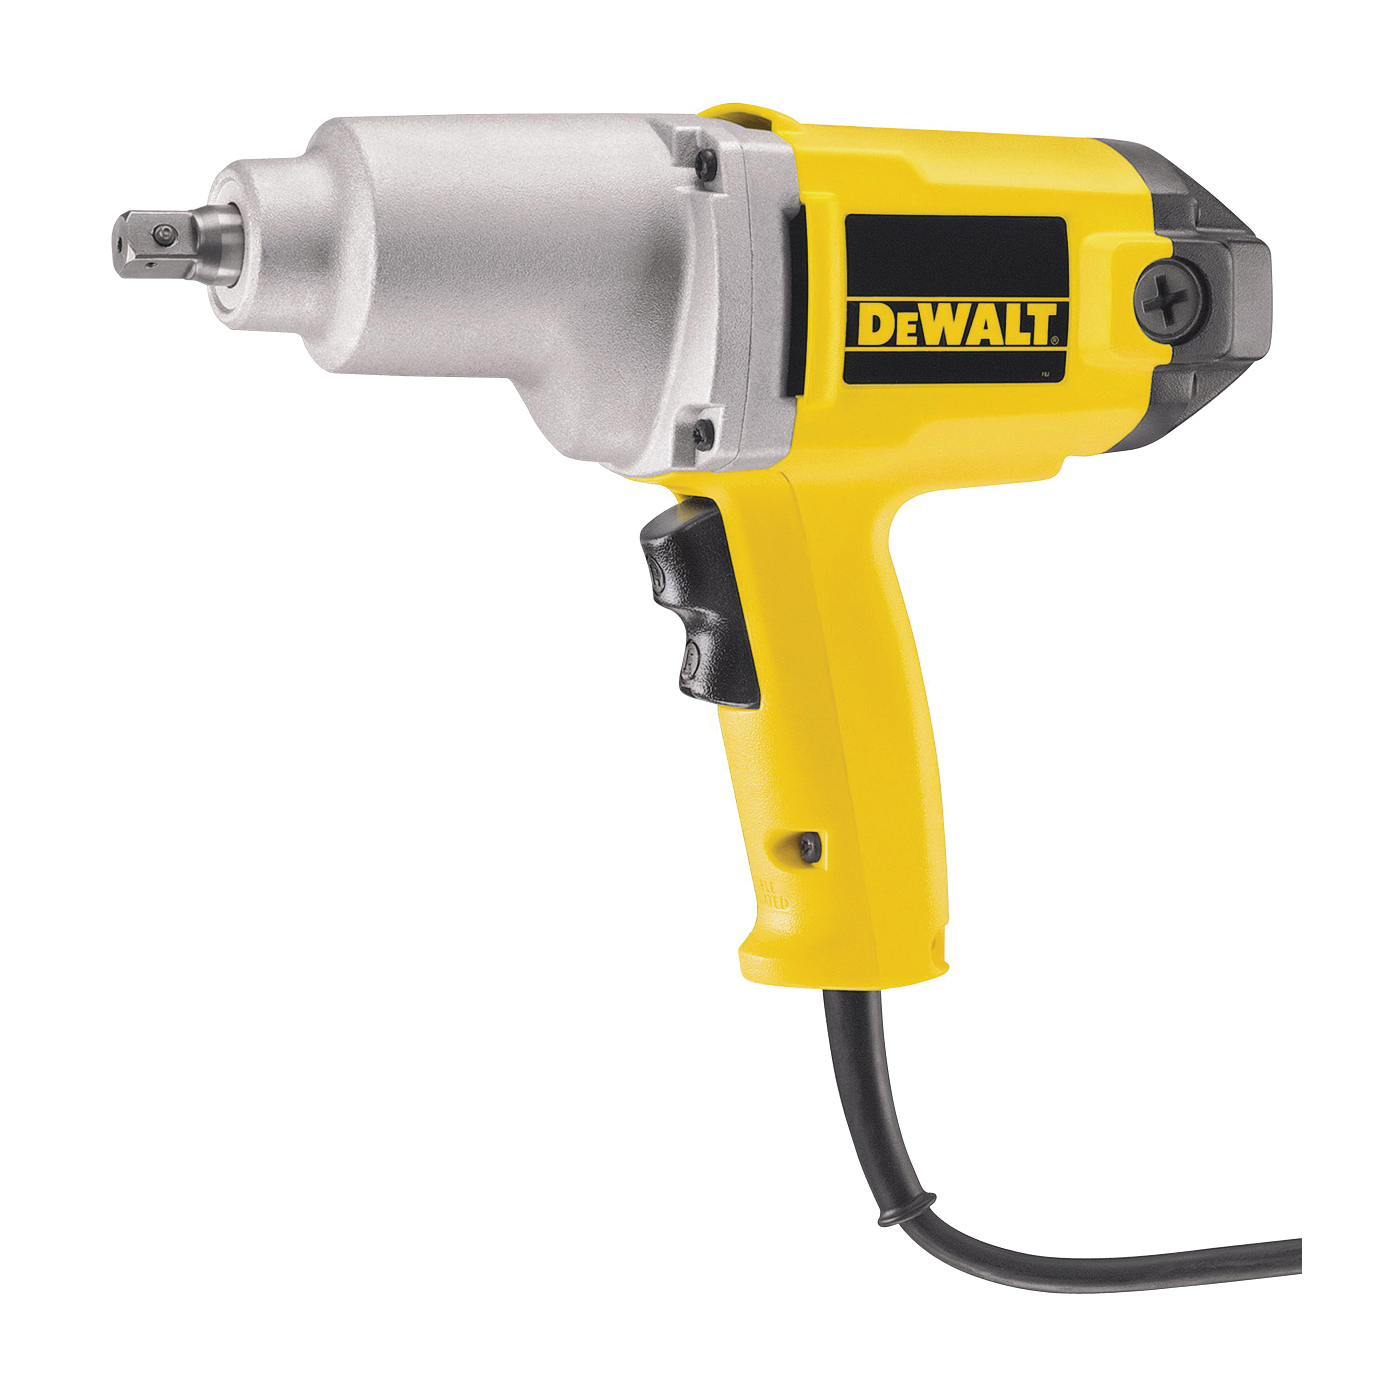 Buy DeWALT DW292 Impact Wrench with Detent Pin Anvil, 7.5 A, 1/2 in Drive,  Square Drive, 2700 ipm, 2100 rpm Speed Yellow